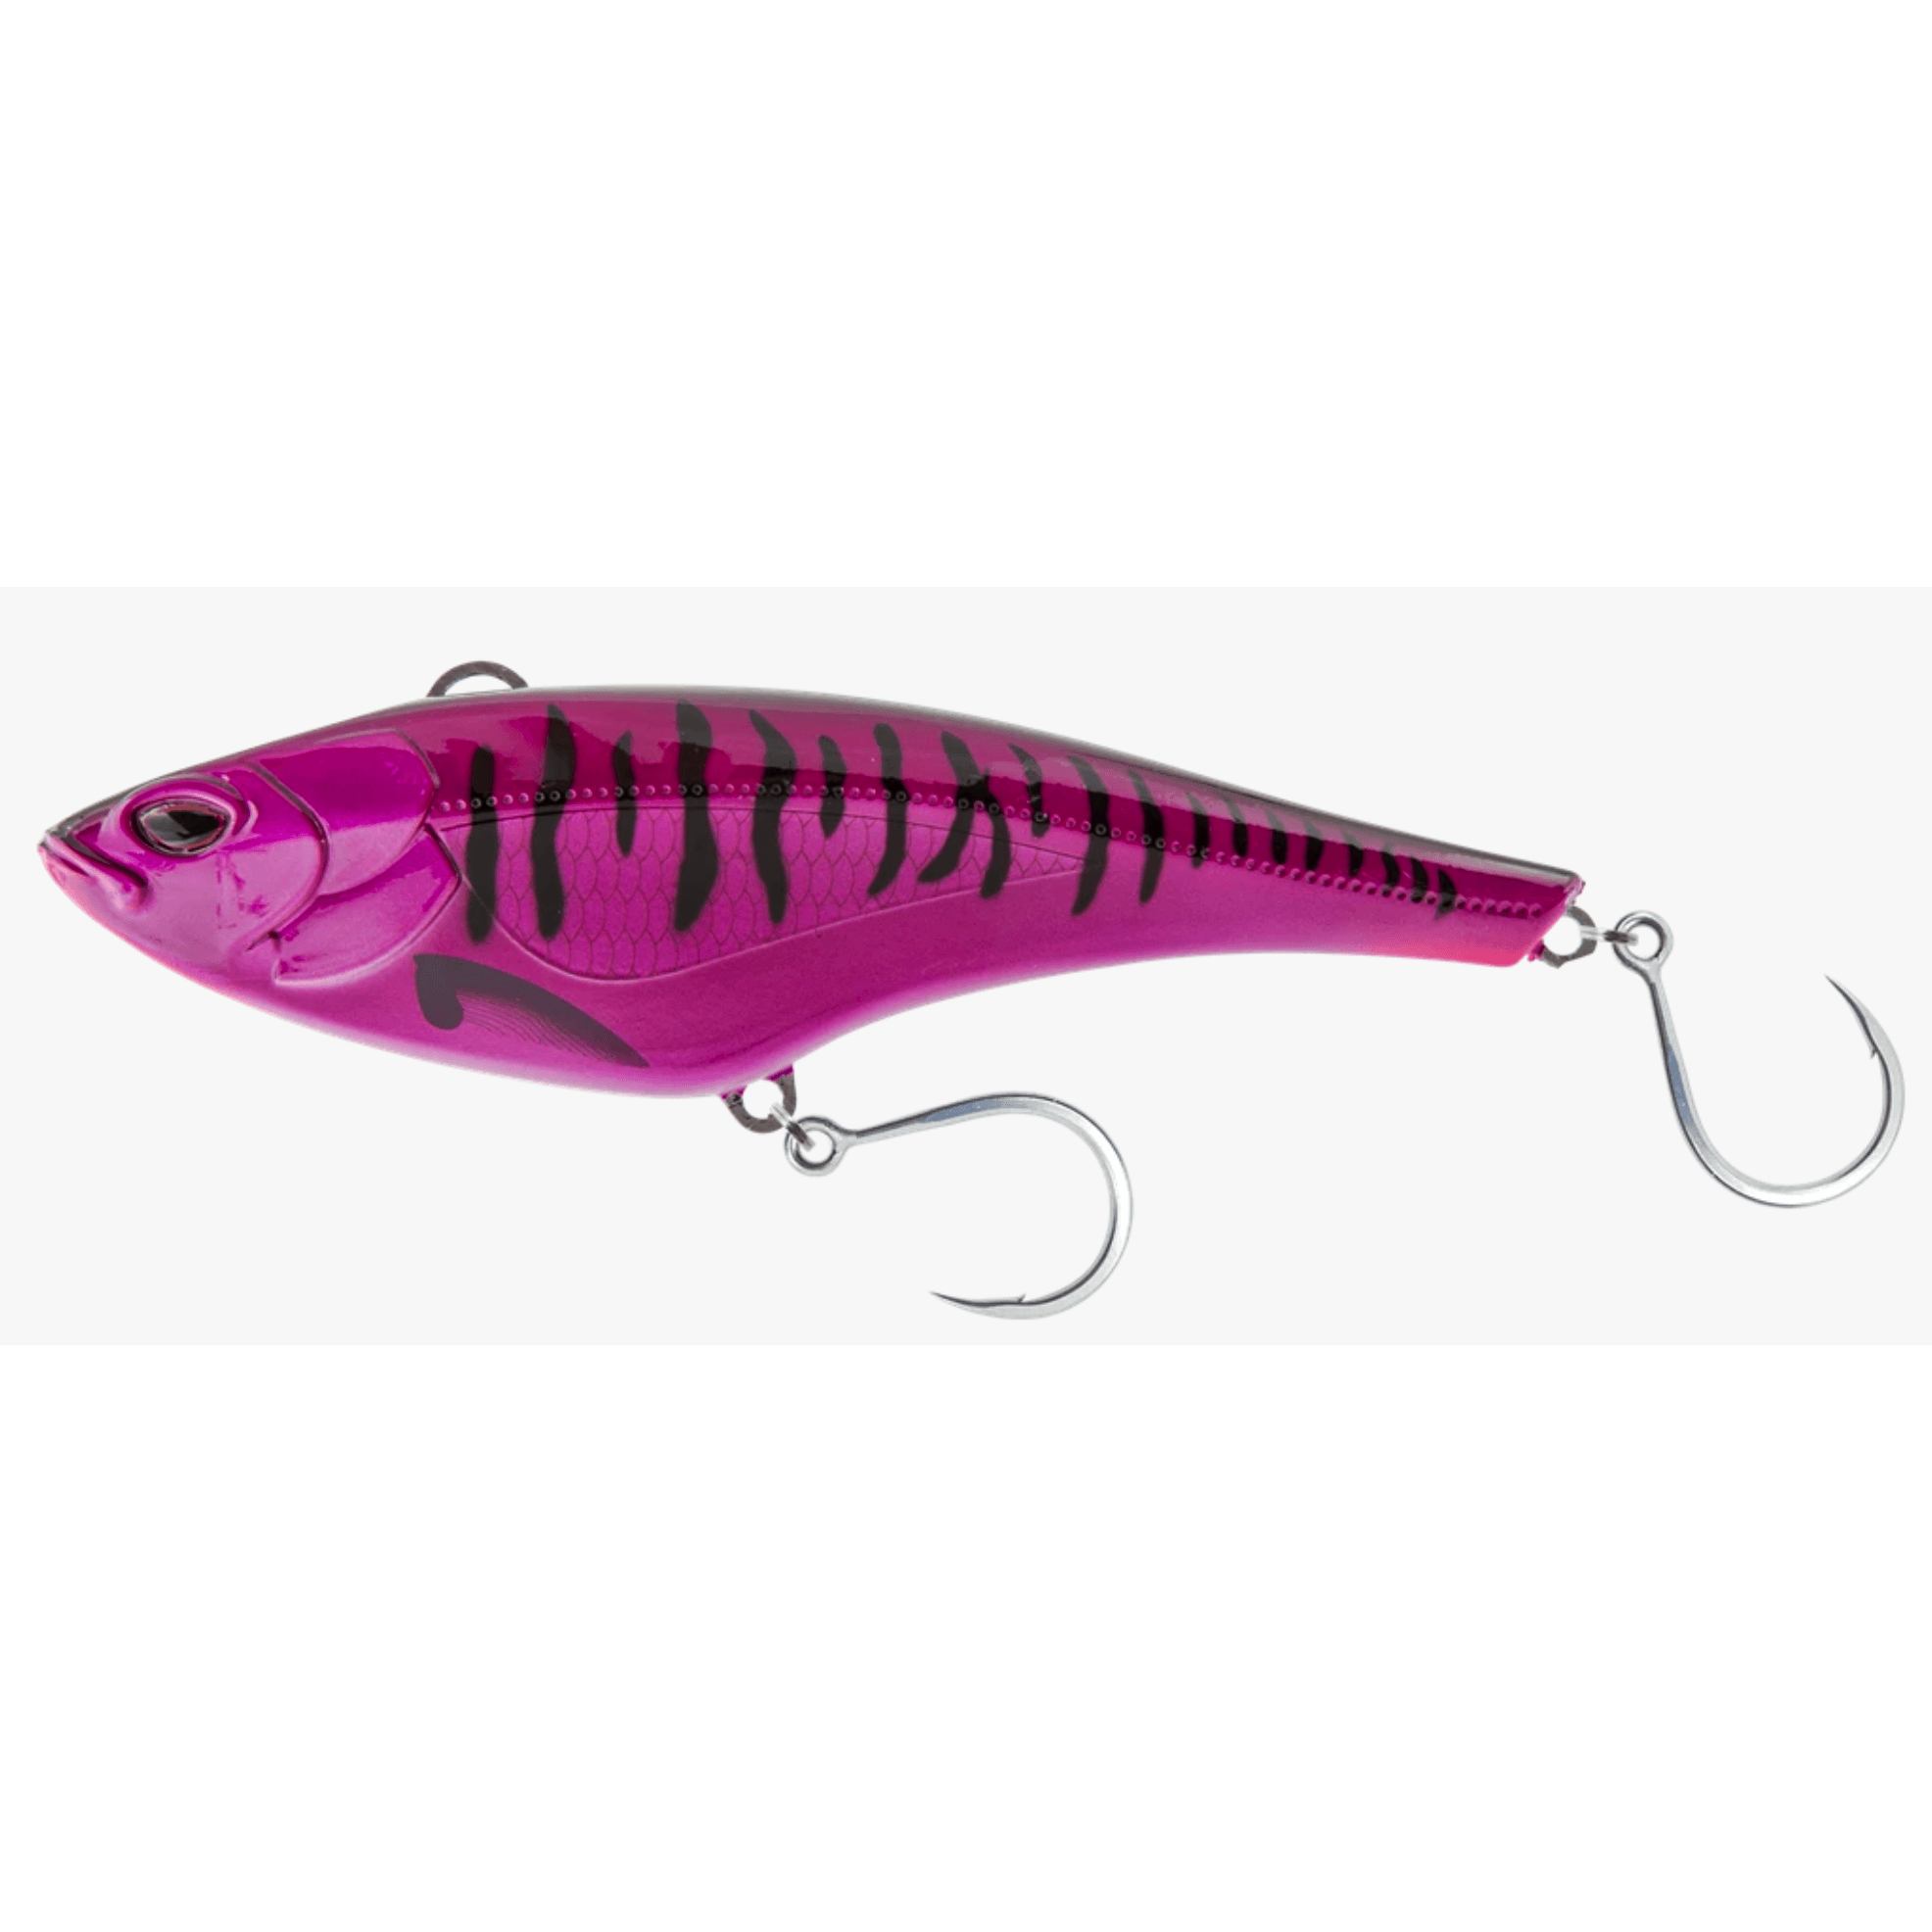 Nomad Design Madmacs High Speed Trolling Lure - 160mm